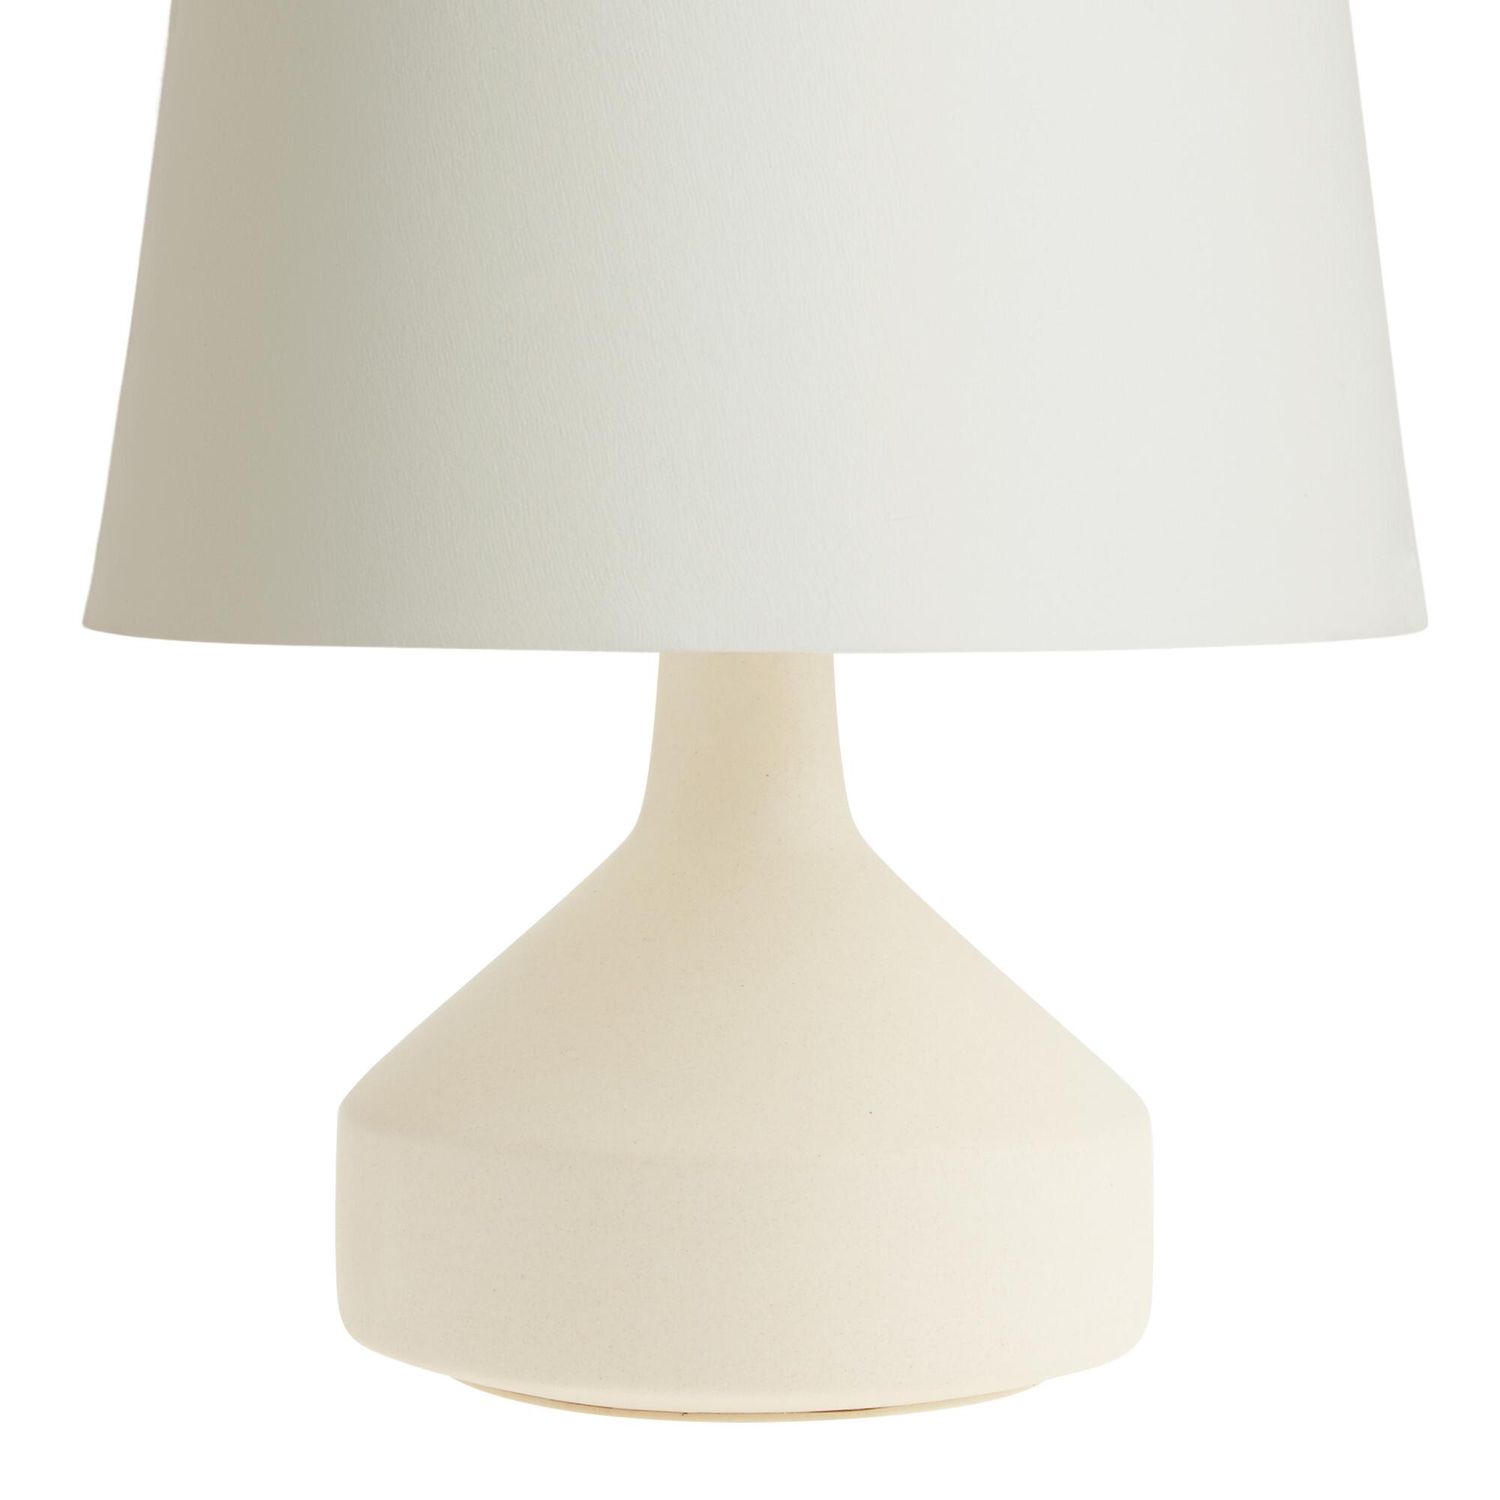 Shop White Ceramic Funnel Accent Lamp Base from World Market on Openhaus